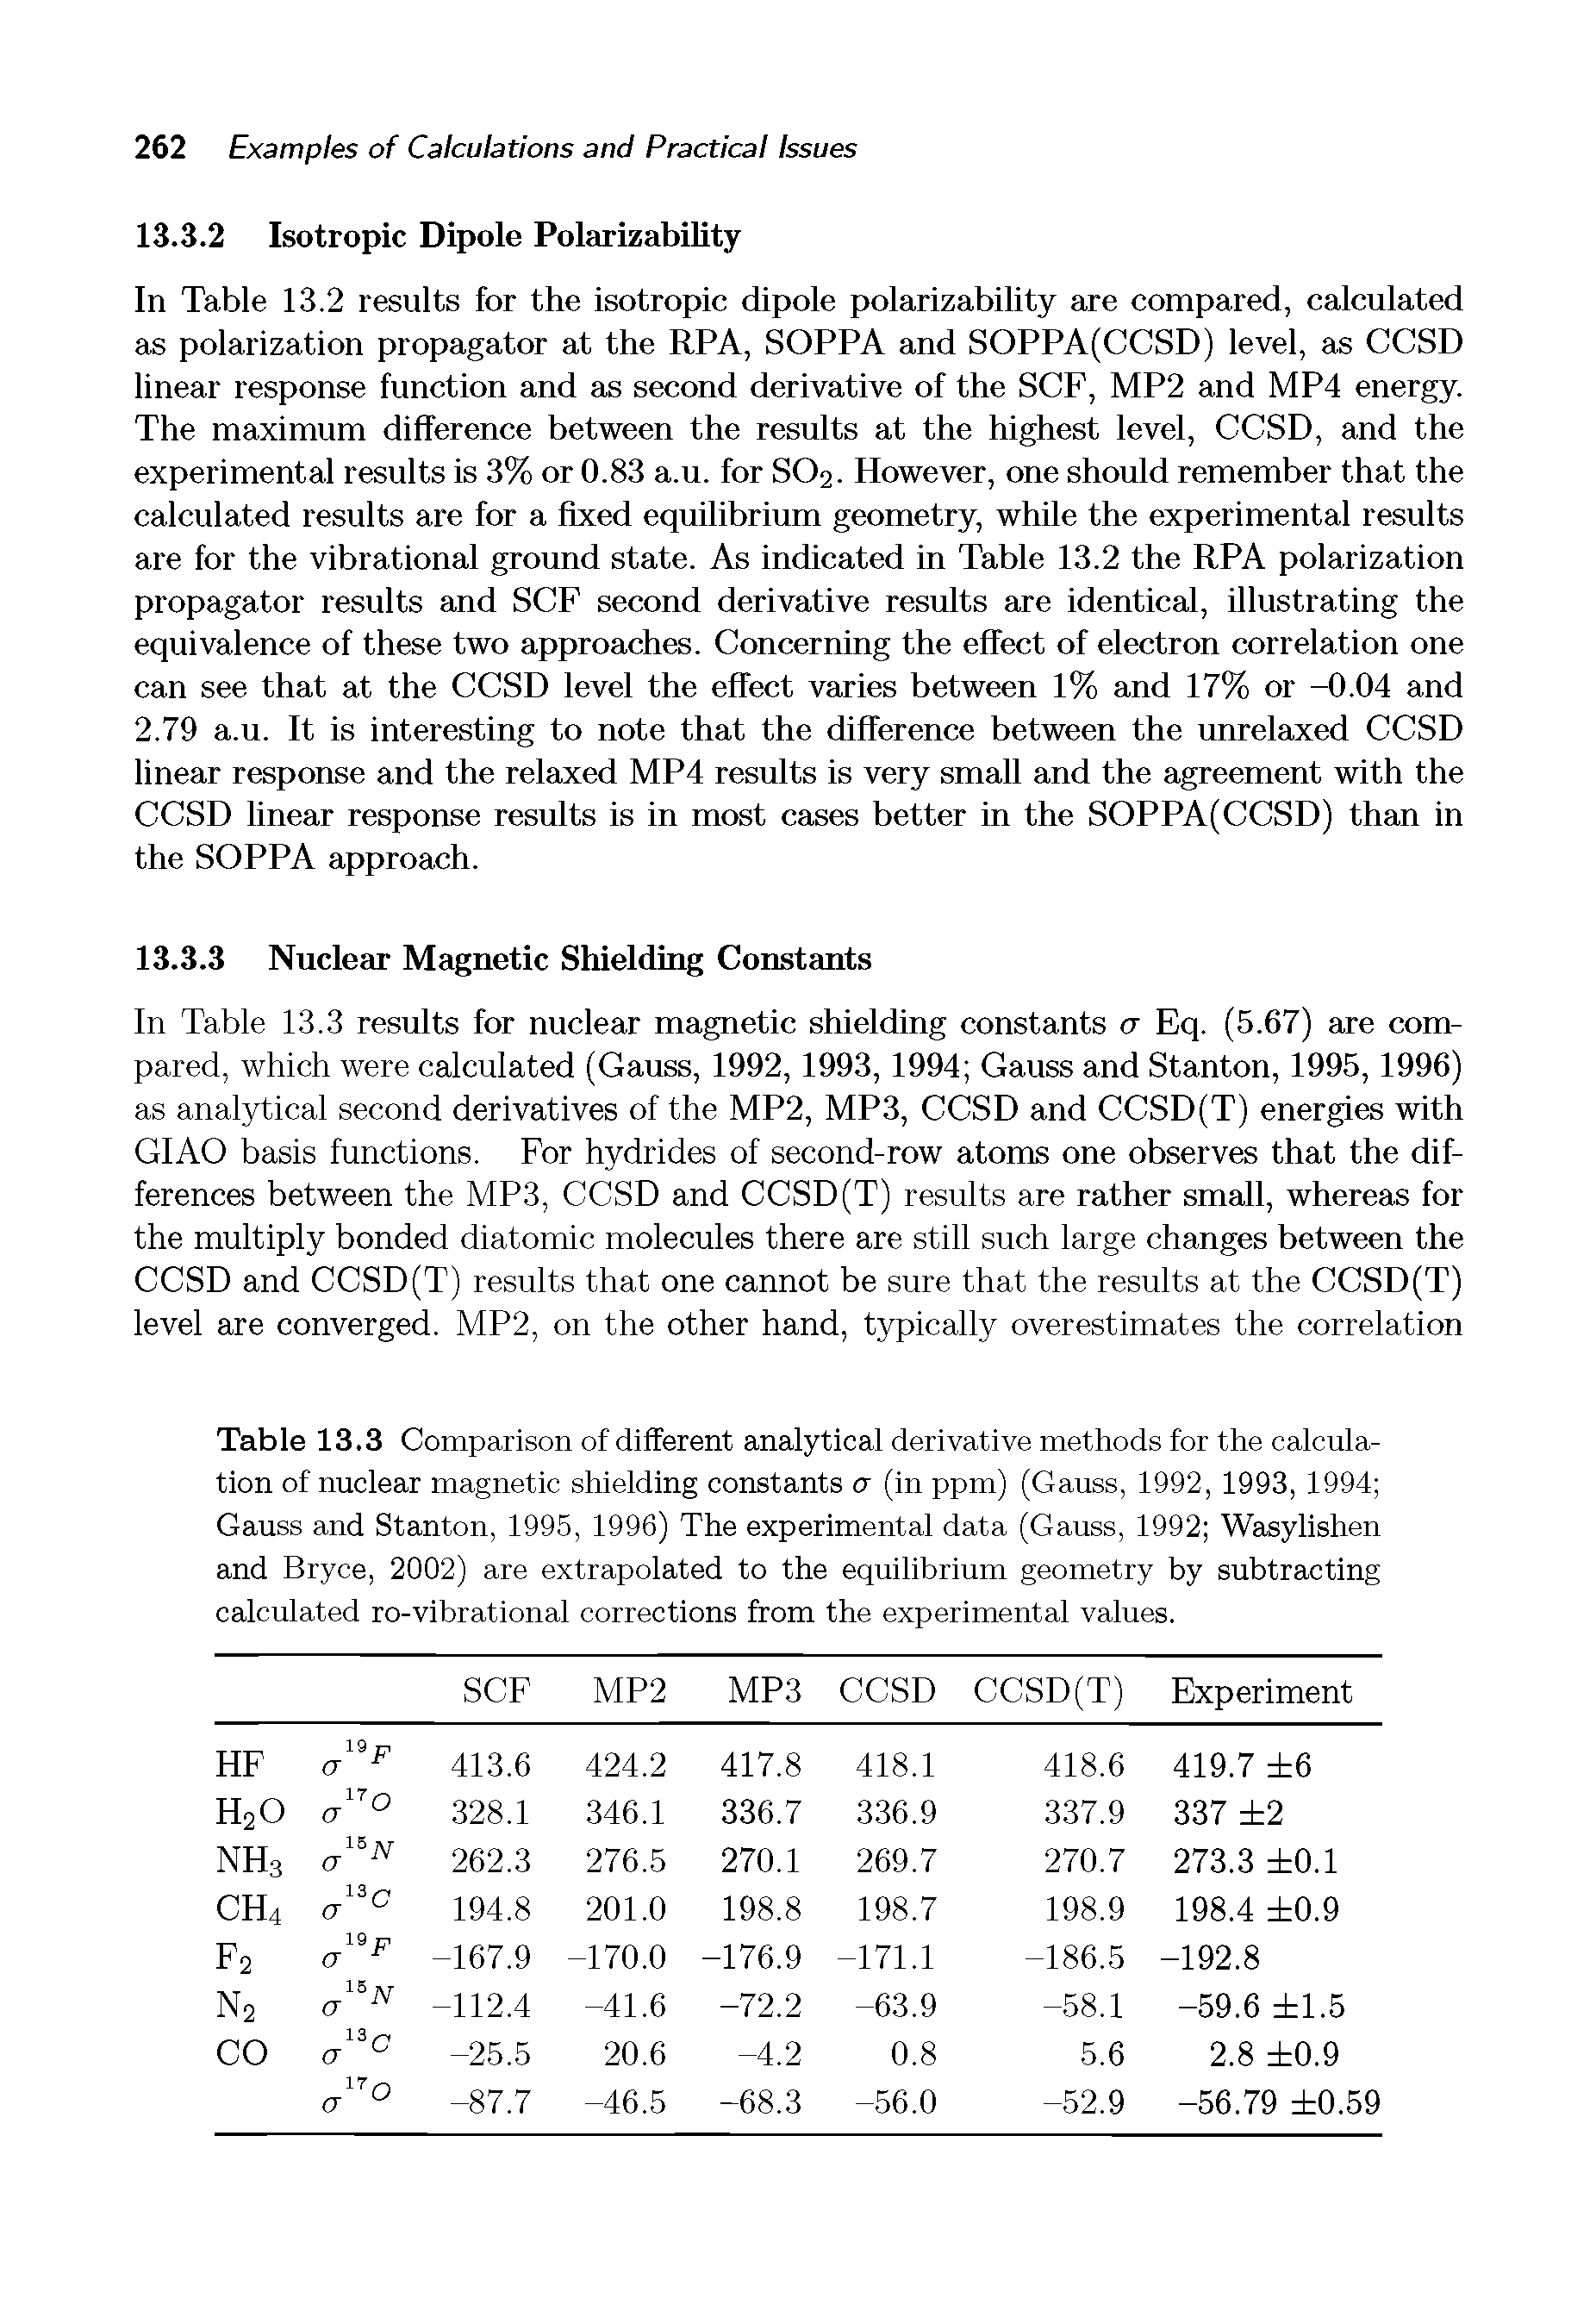 Table 13.3 Comparison of different analytical derivative methods for the calculation of nuclear magnetic shielding constants a (in ppm) (Gauss, 1992, 1993, 1994 Gauss and Stanton, 1995, 1996) The experimental data (Gauss, 1992 Wasylishen and Bryce, 2002) are extrapolated to the equilibrium geometry by subtracting calculated ro-vibrational corrections from the experimental values.